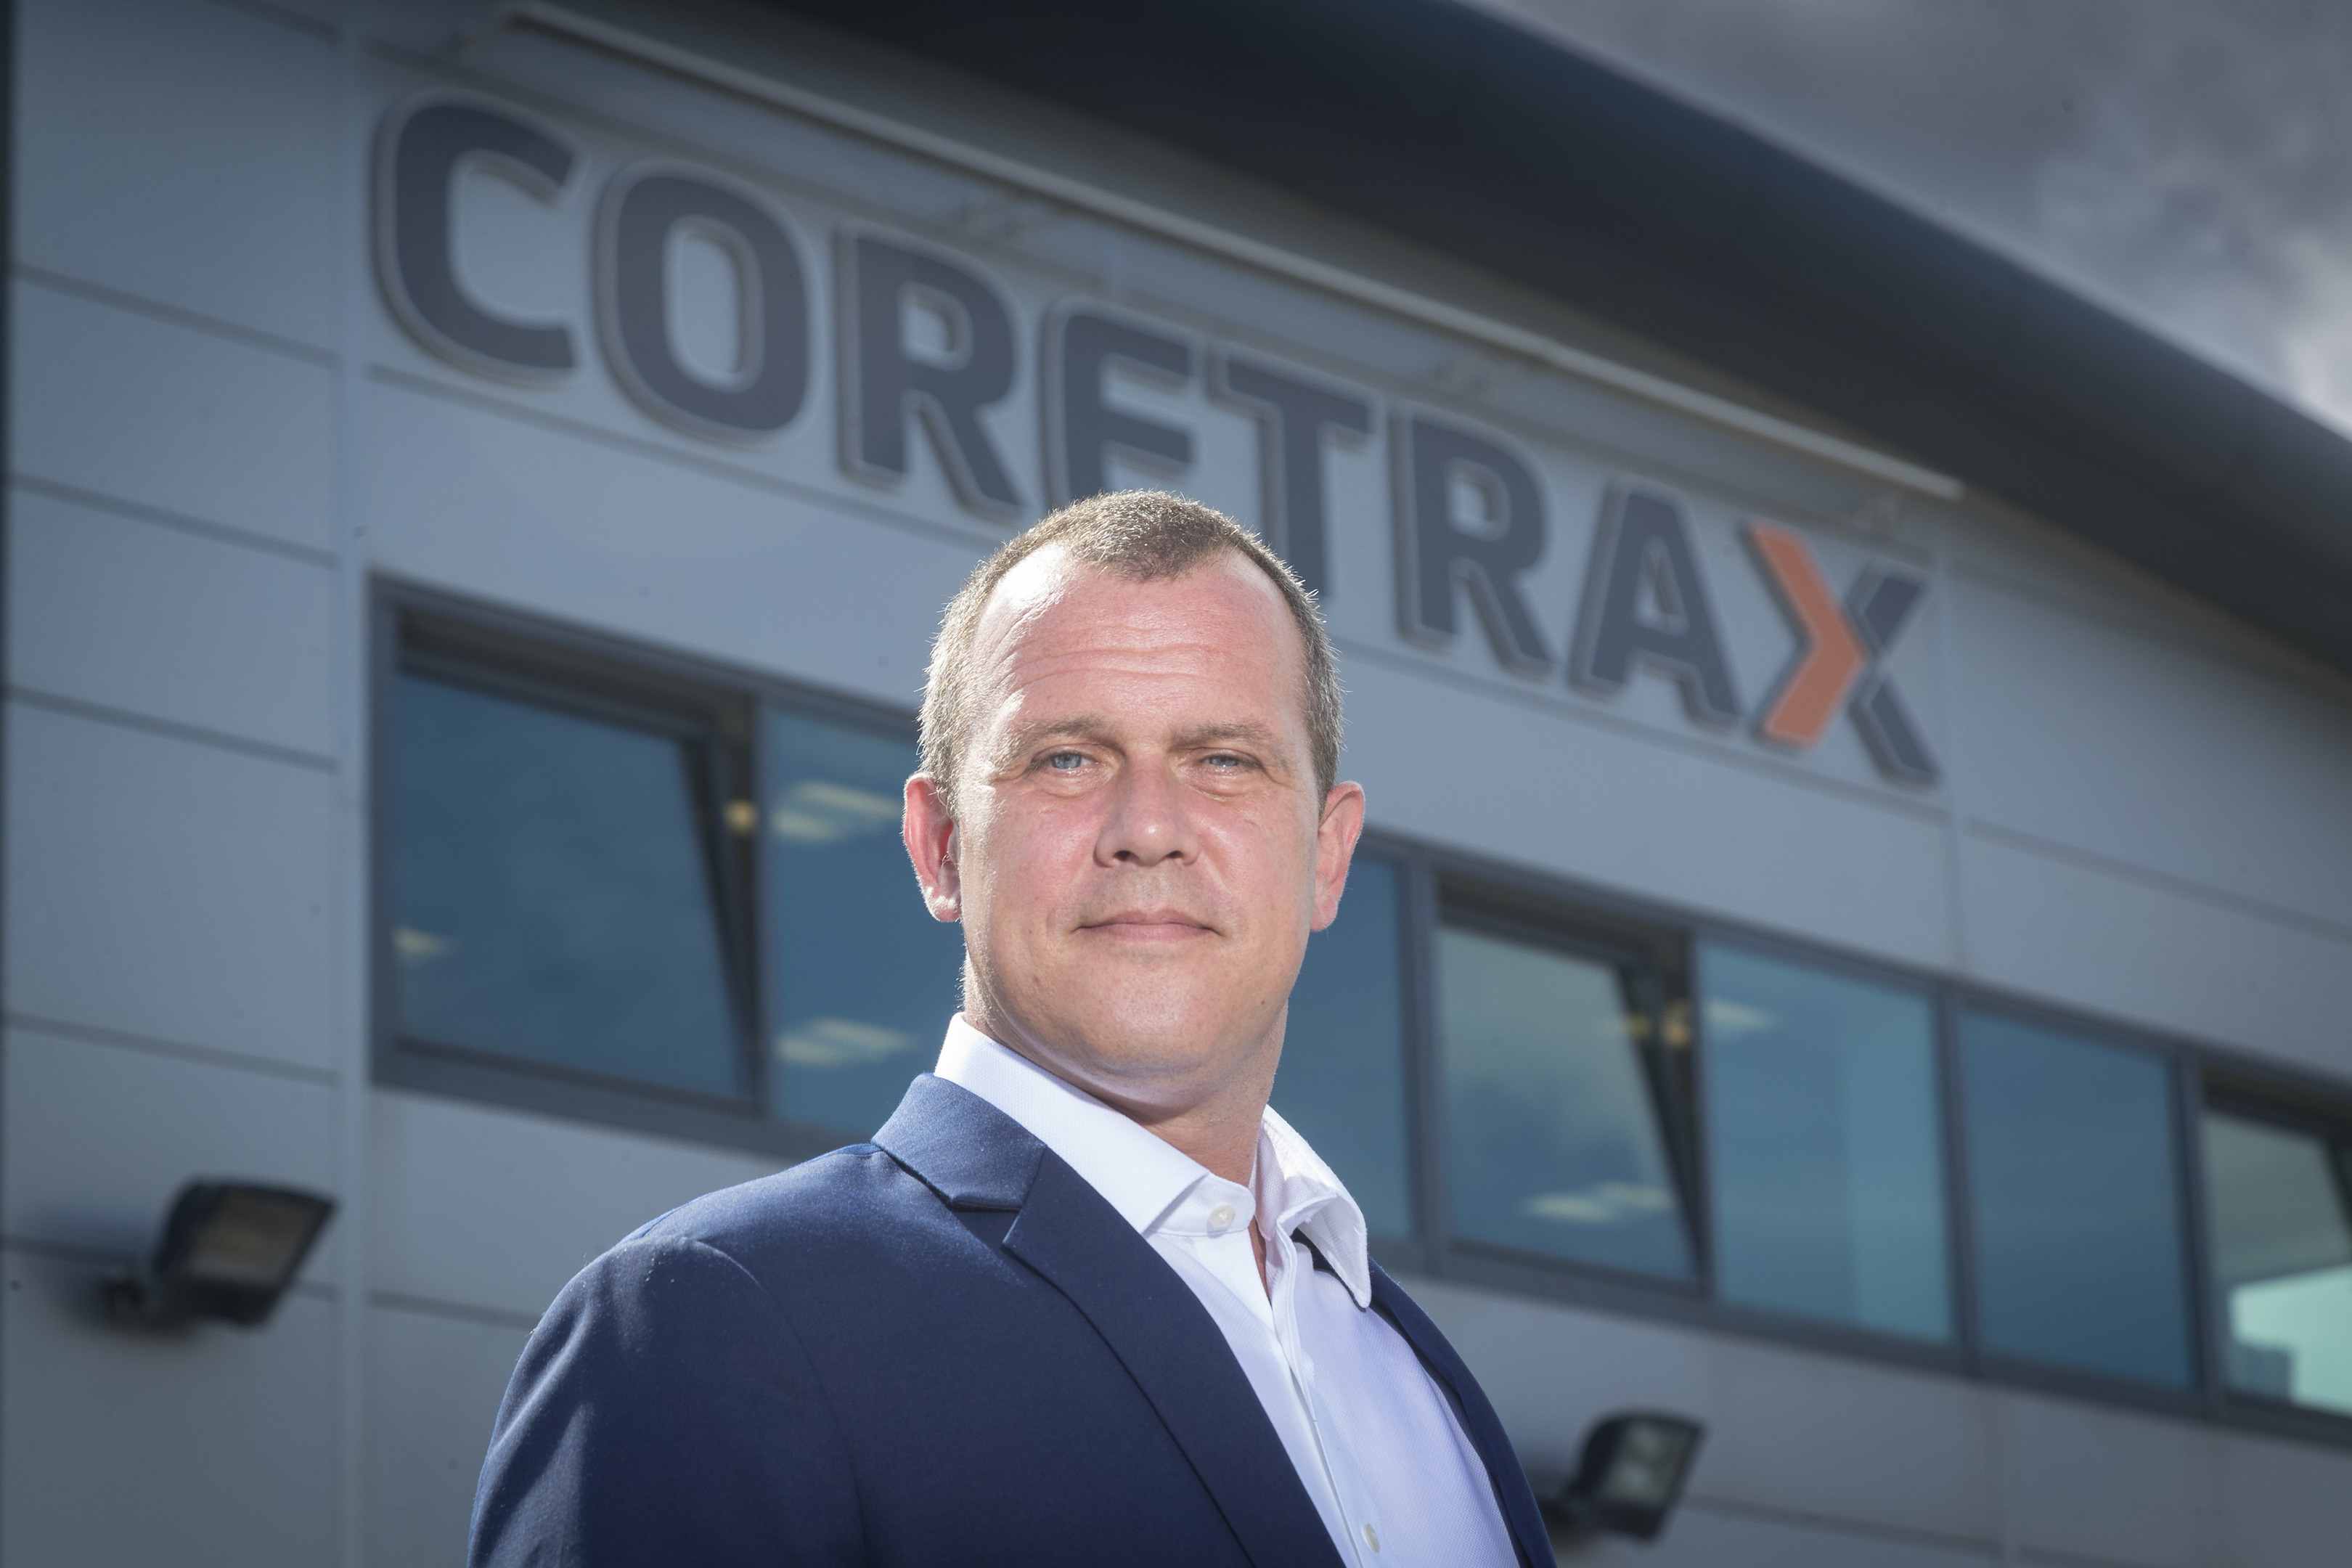 Aberdeen-based Coretrax in merger with US firm - News for the ...